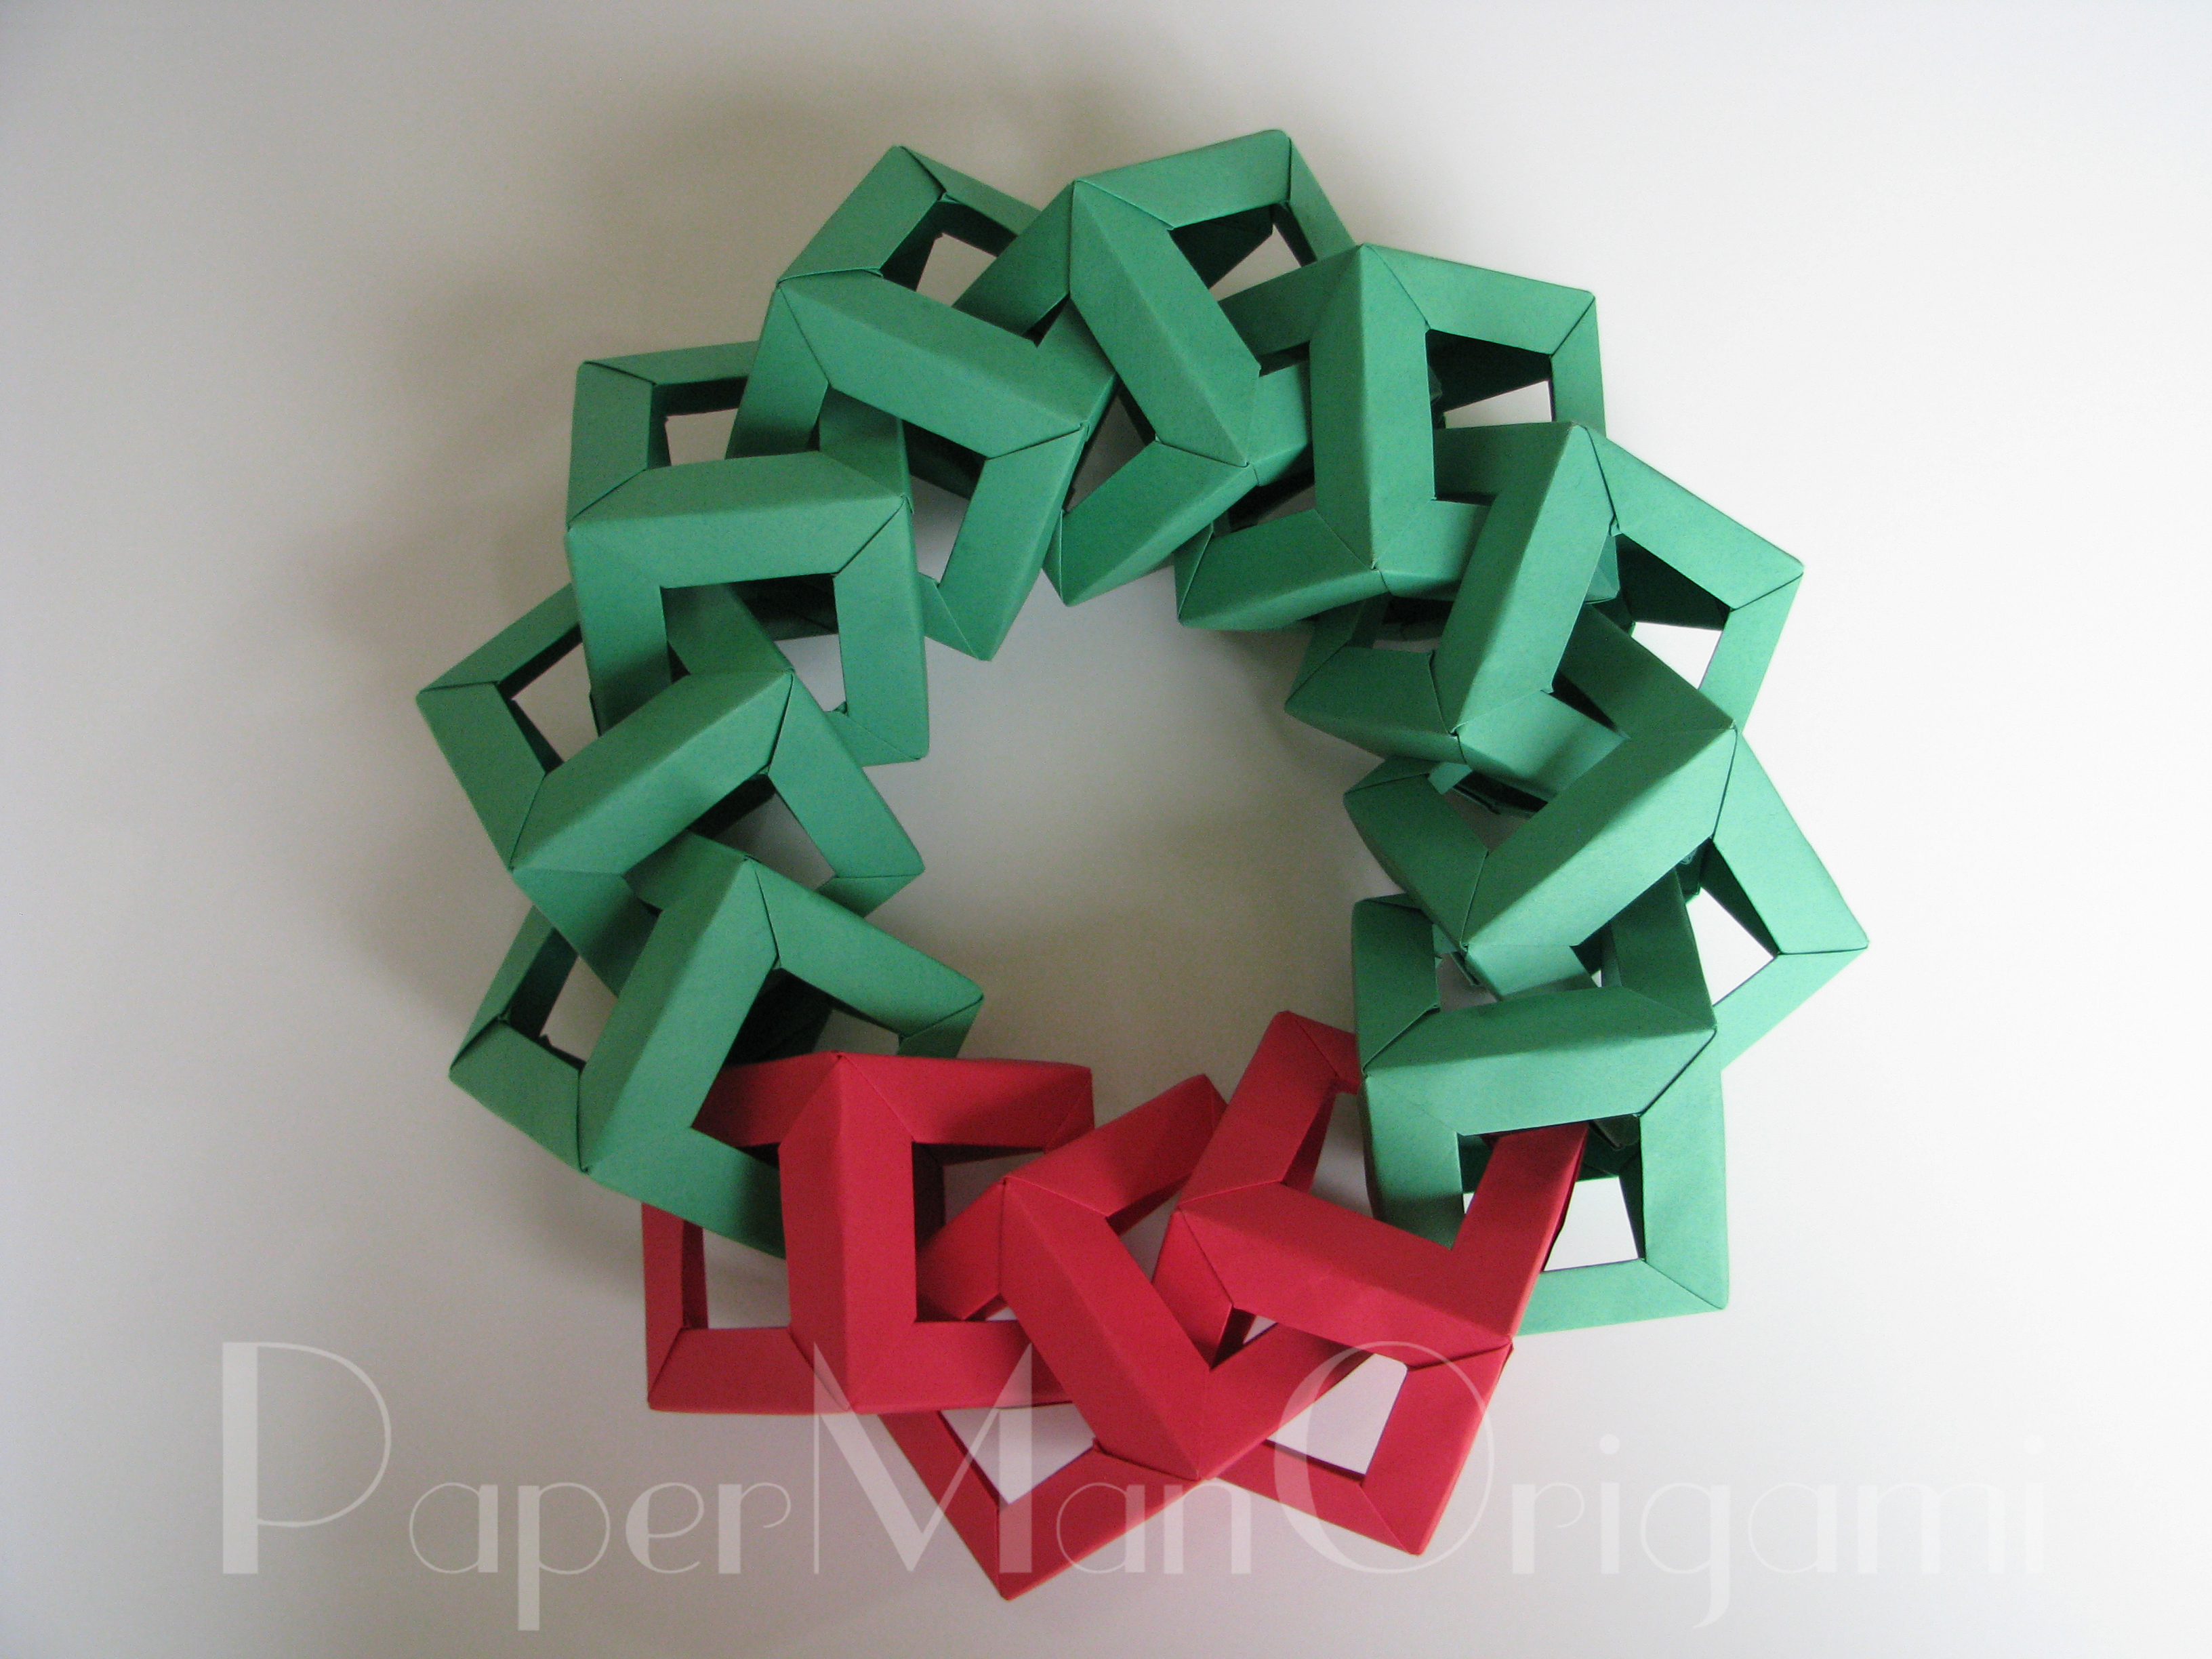 Easy Origami Christmas Ornaments Instructions Origami Christmas Decorations Origami Wreath